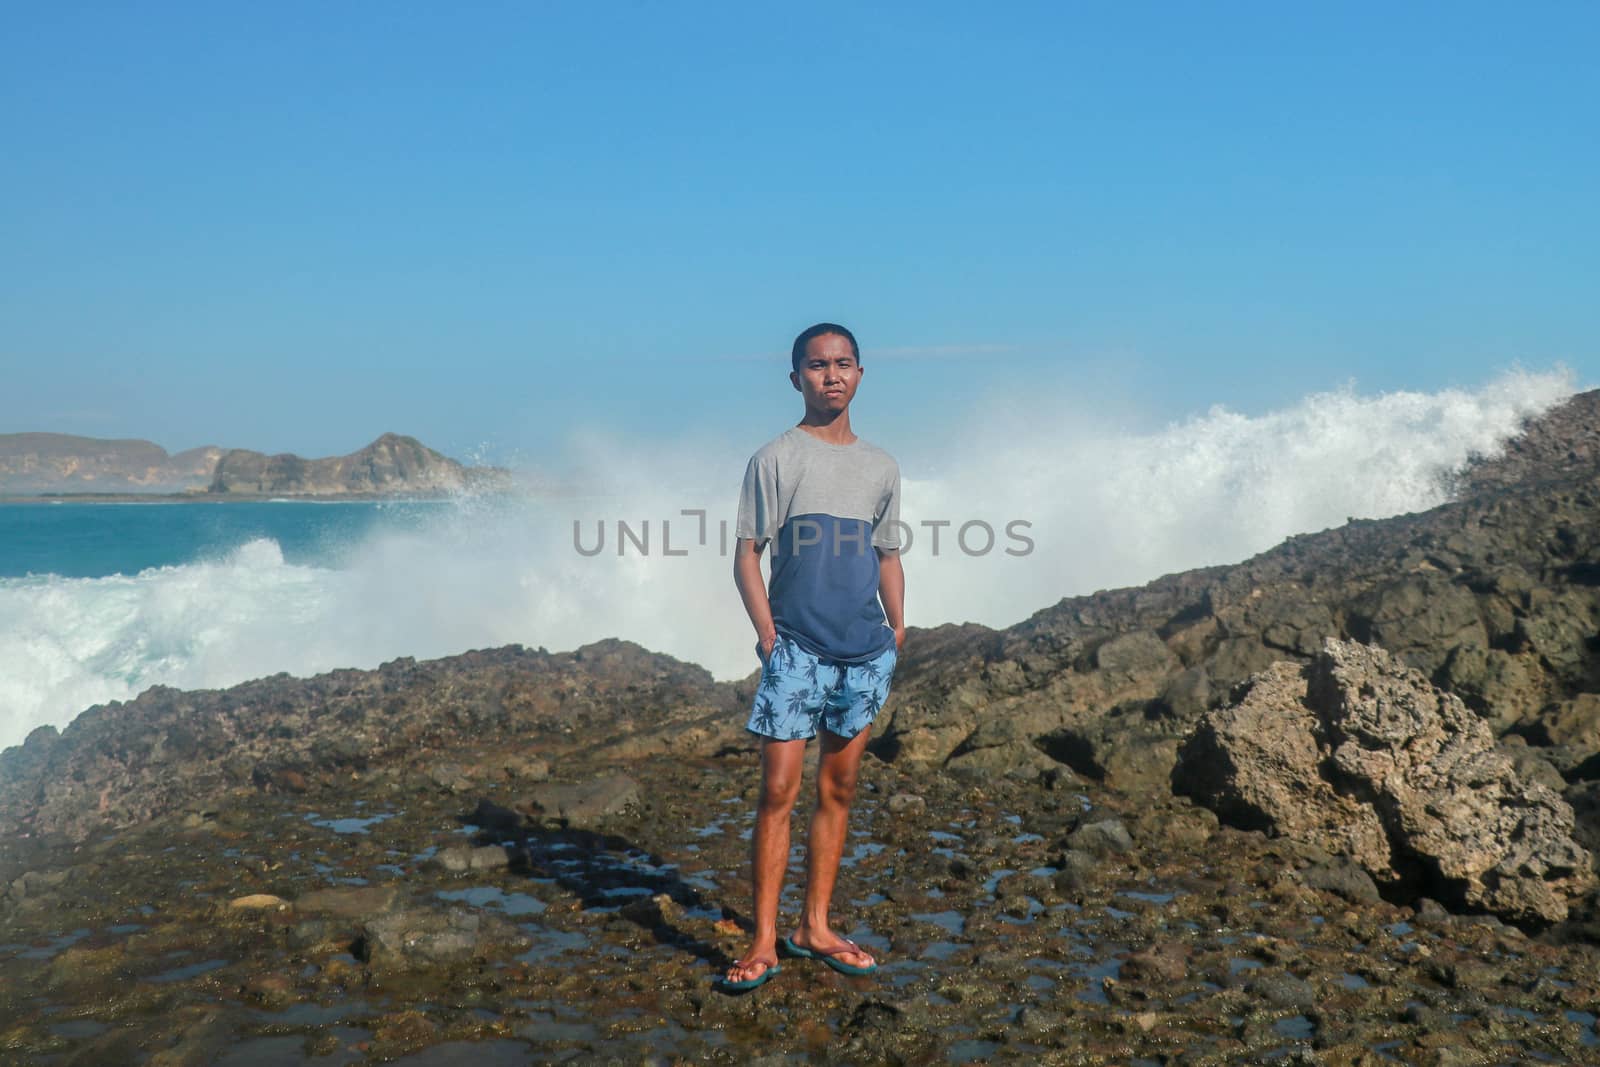 Waves hitting round rocks and splashing. A young man stands on a rocky shore and the waves crash against a cliff by Sanatana2008